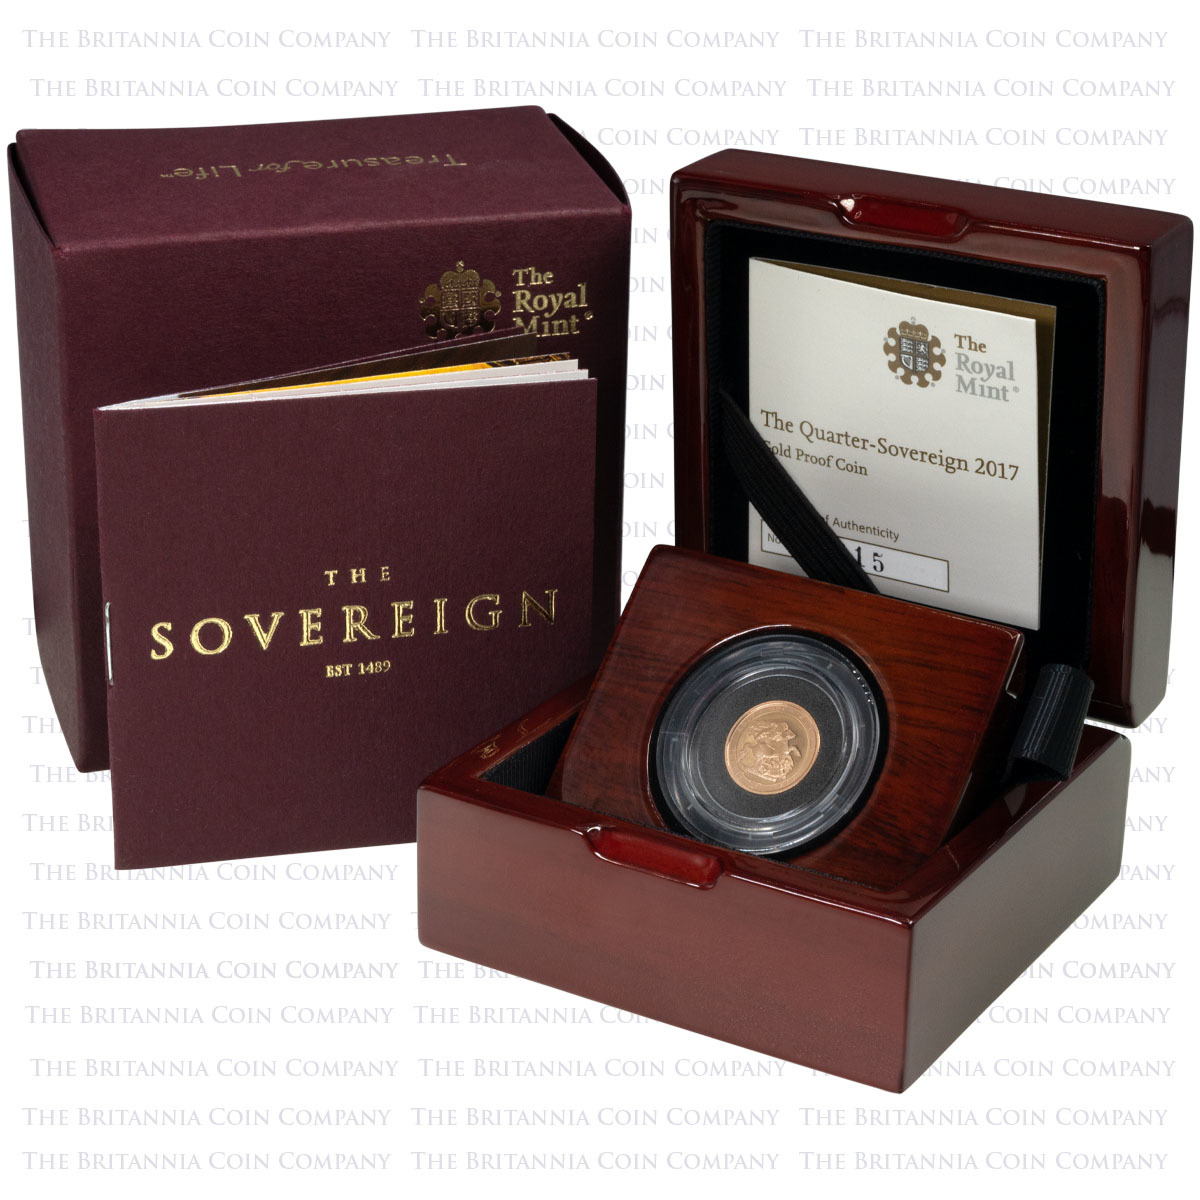 SVQ17 2017 Gold Proof Quarter Sovereign Coin 200th Anniversary Boxed